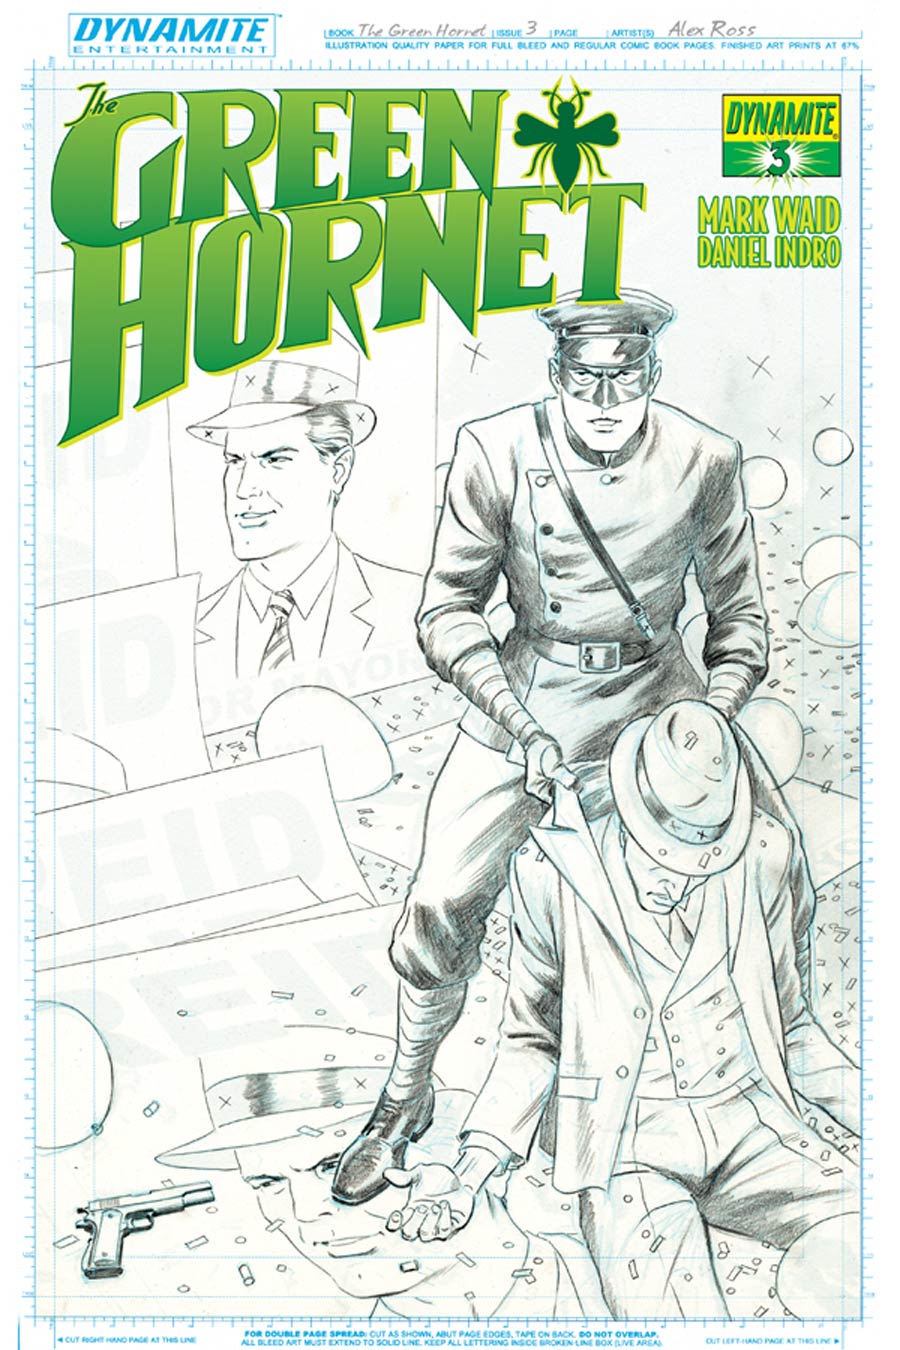 Mark Waids Green Hornet #3 Cover F High-End Paolo Rivera Artboard Ultra-Limited Cover (ONLY 25 COPIES IN EXISTENCE!)